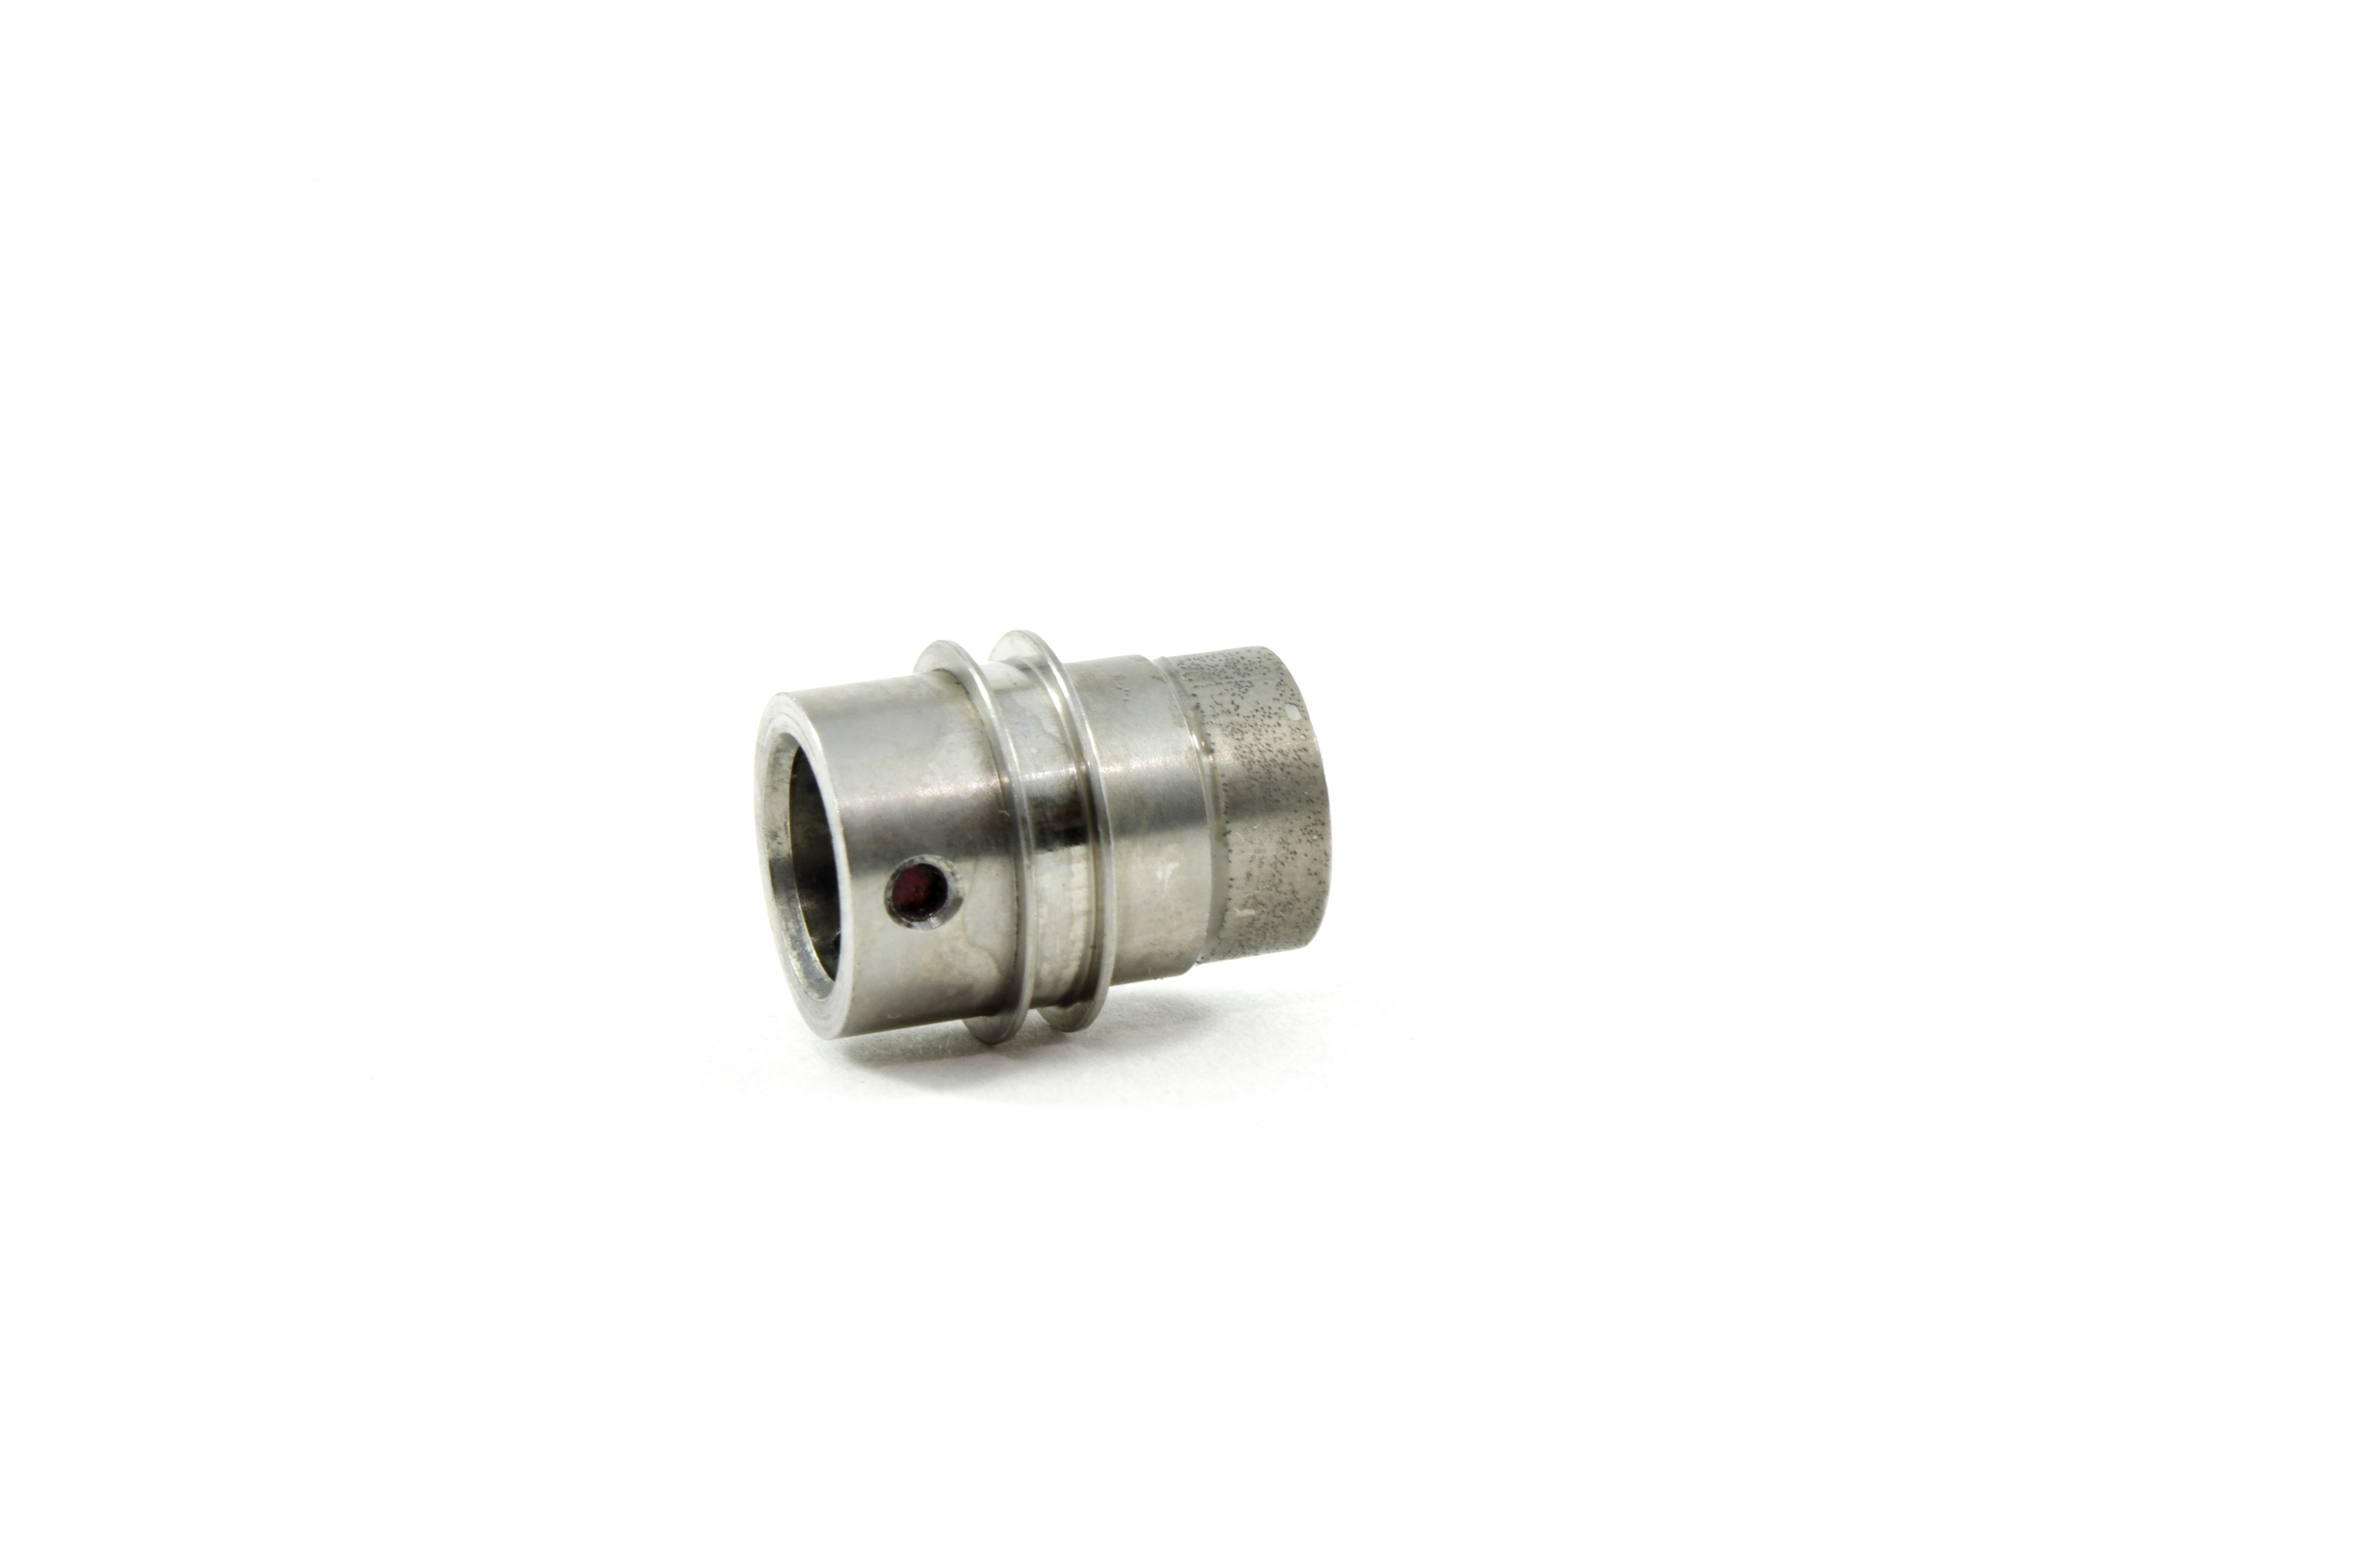 OEM Insertion Tube Proximal End Fitting - GIF-160